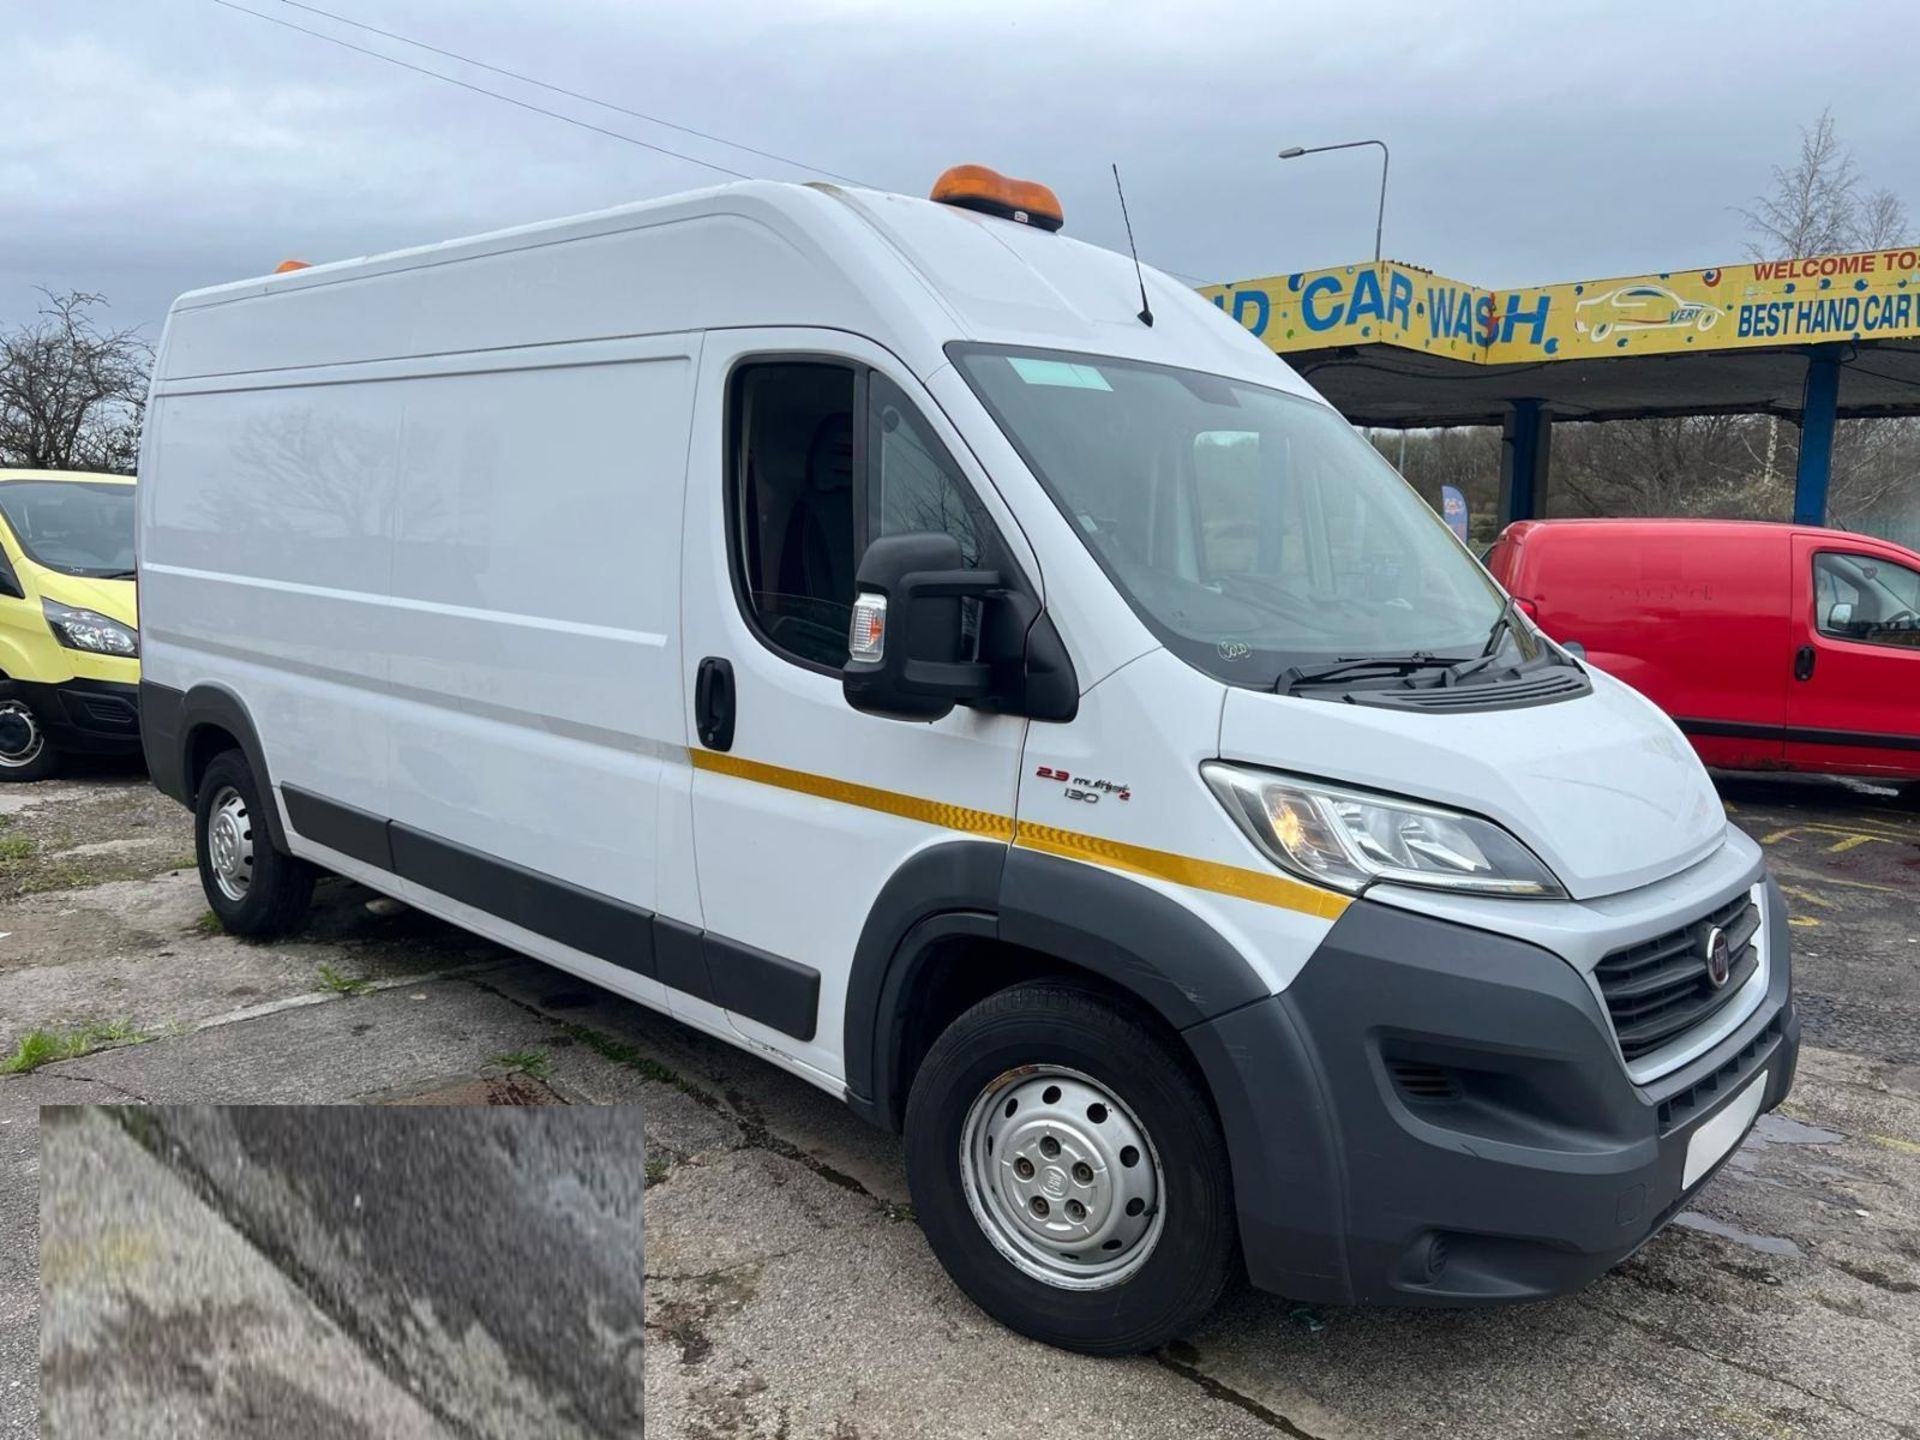 2017 FIAT DUCATO LWB L3 H2 PANEL VAN READY FOR ACTION! - Image 2 of 14